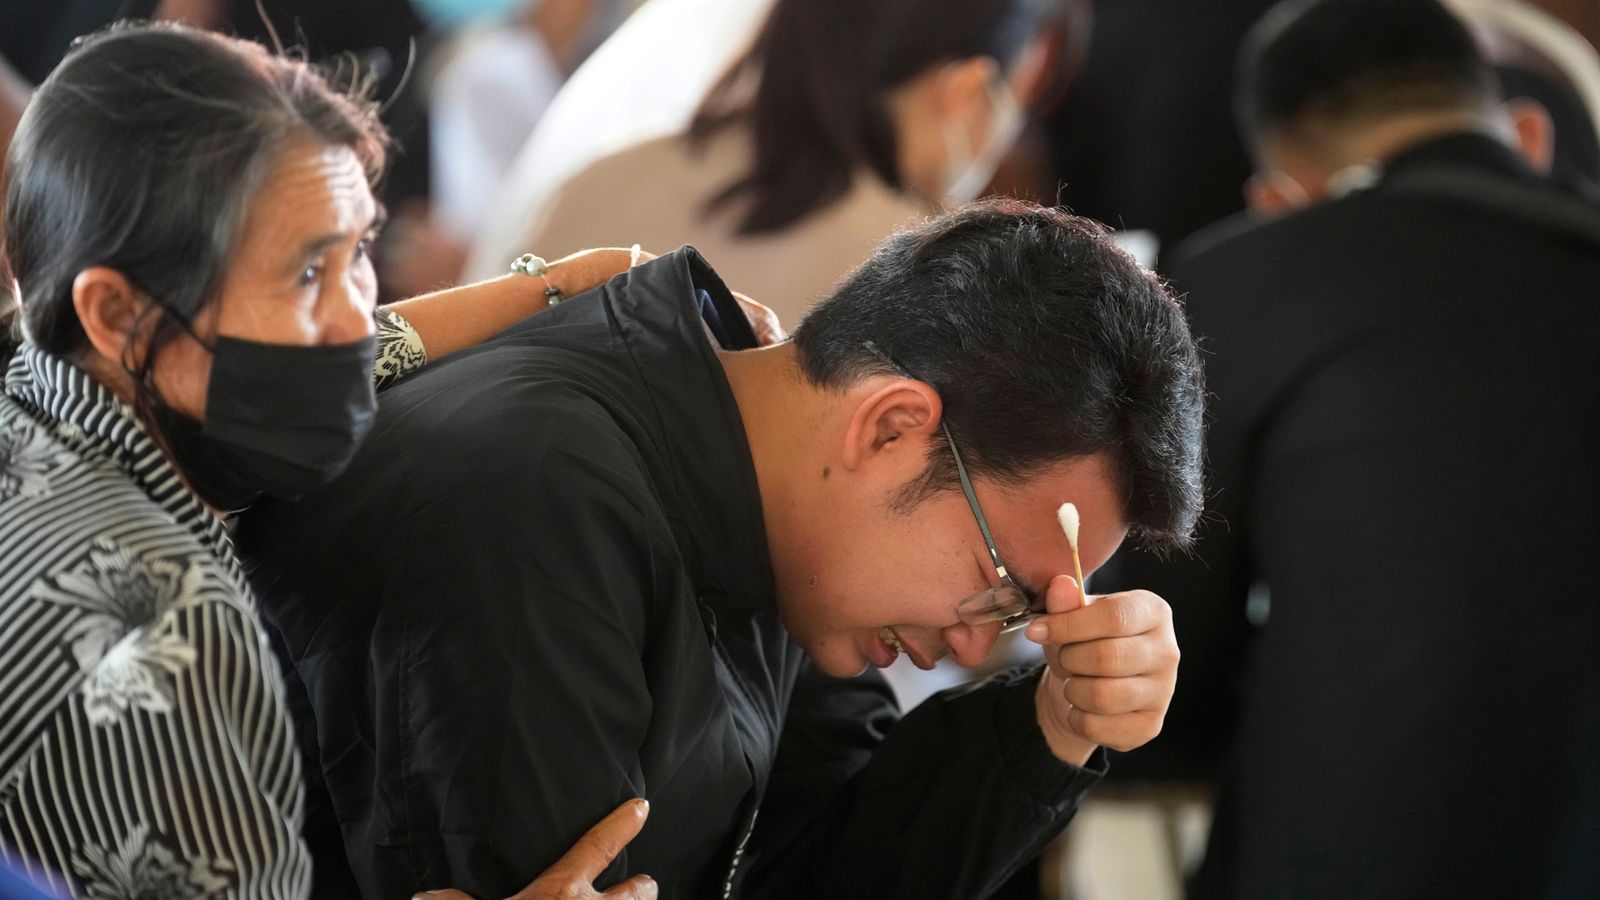 Thailand mourns after nursery school children killed in shooting rampage